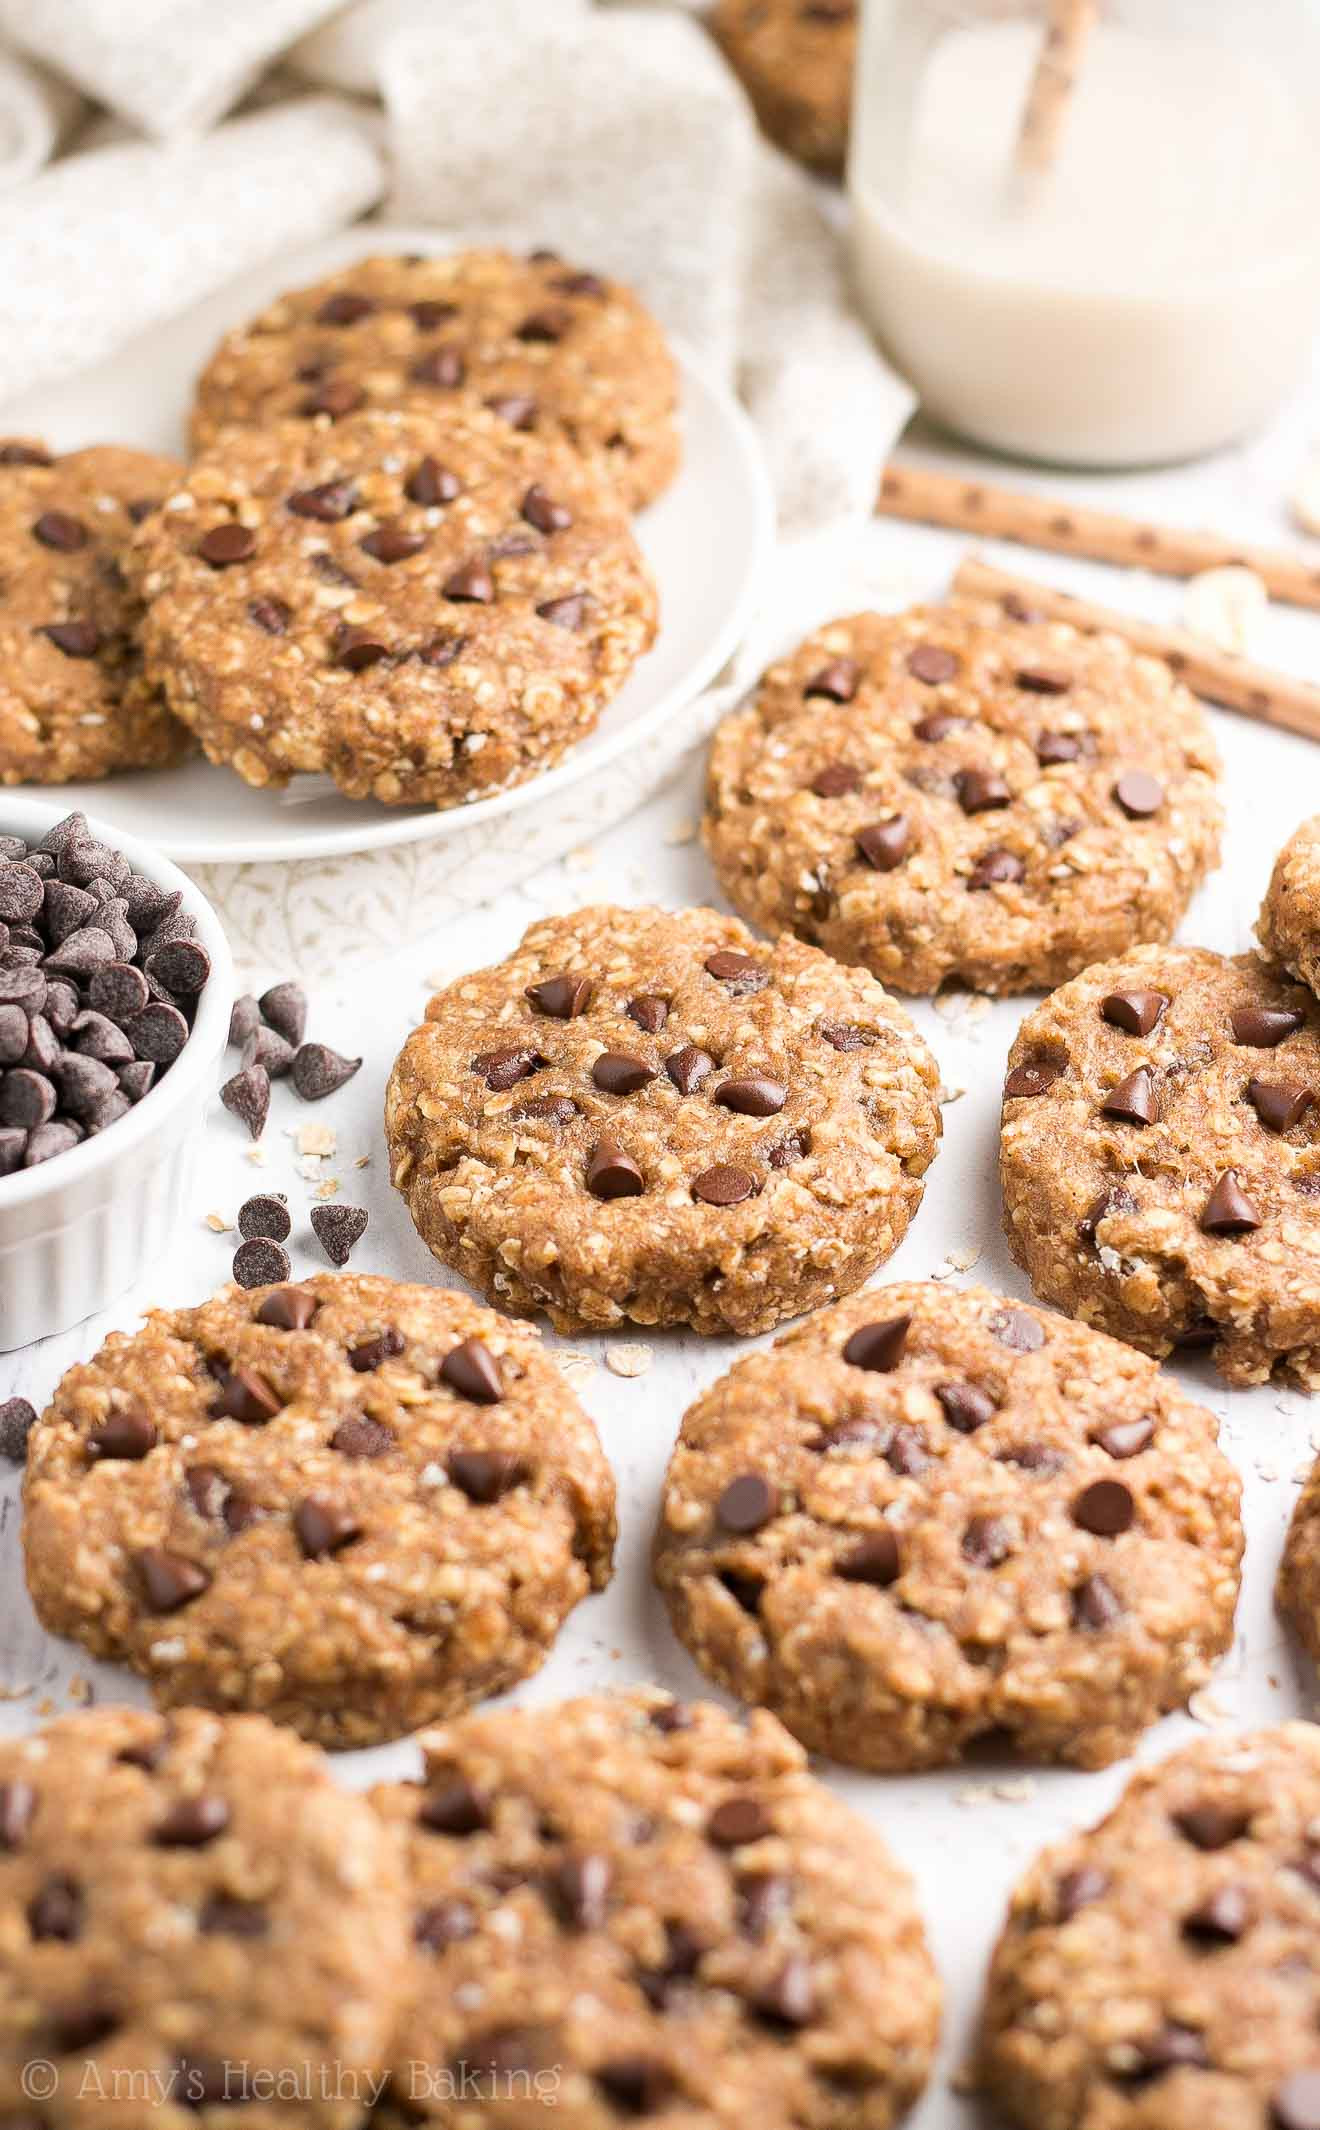 Healthy Peanut Butter Chocolate Chip Cookies
 Healthy Chocolate Chip Peanut Butter Oatmeal Breakfast